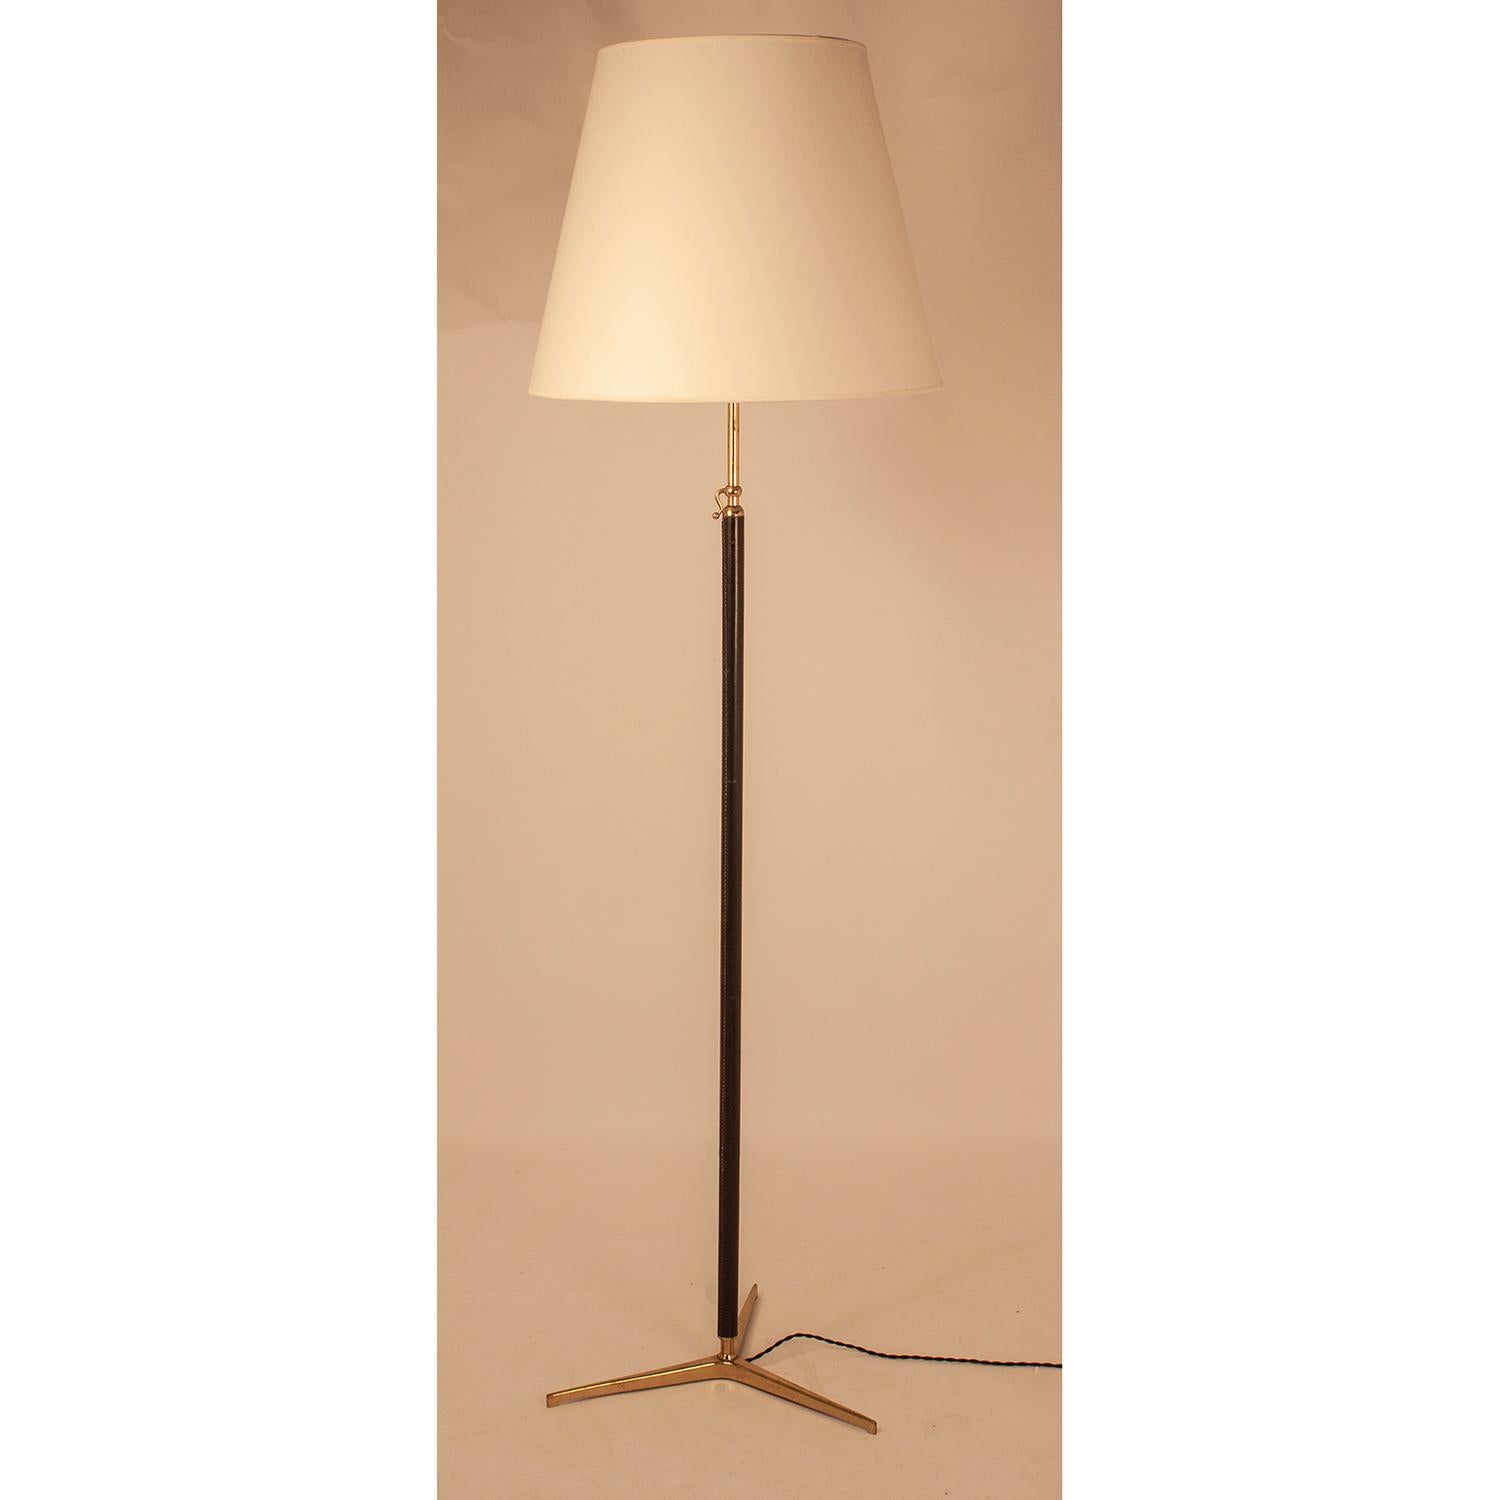 Mid-Century Modern Floor Lamp Produced by Metalarte in the Style of Gino Sarfatti, Leather, Brass For Sale